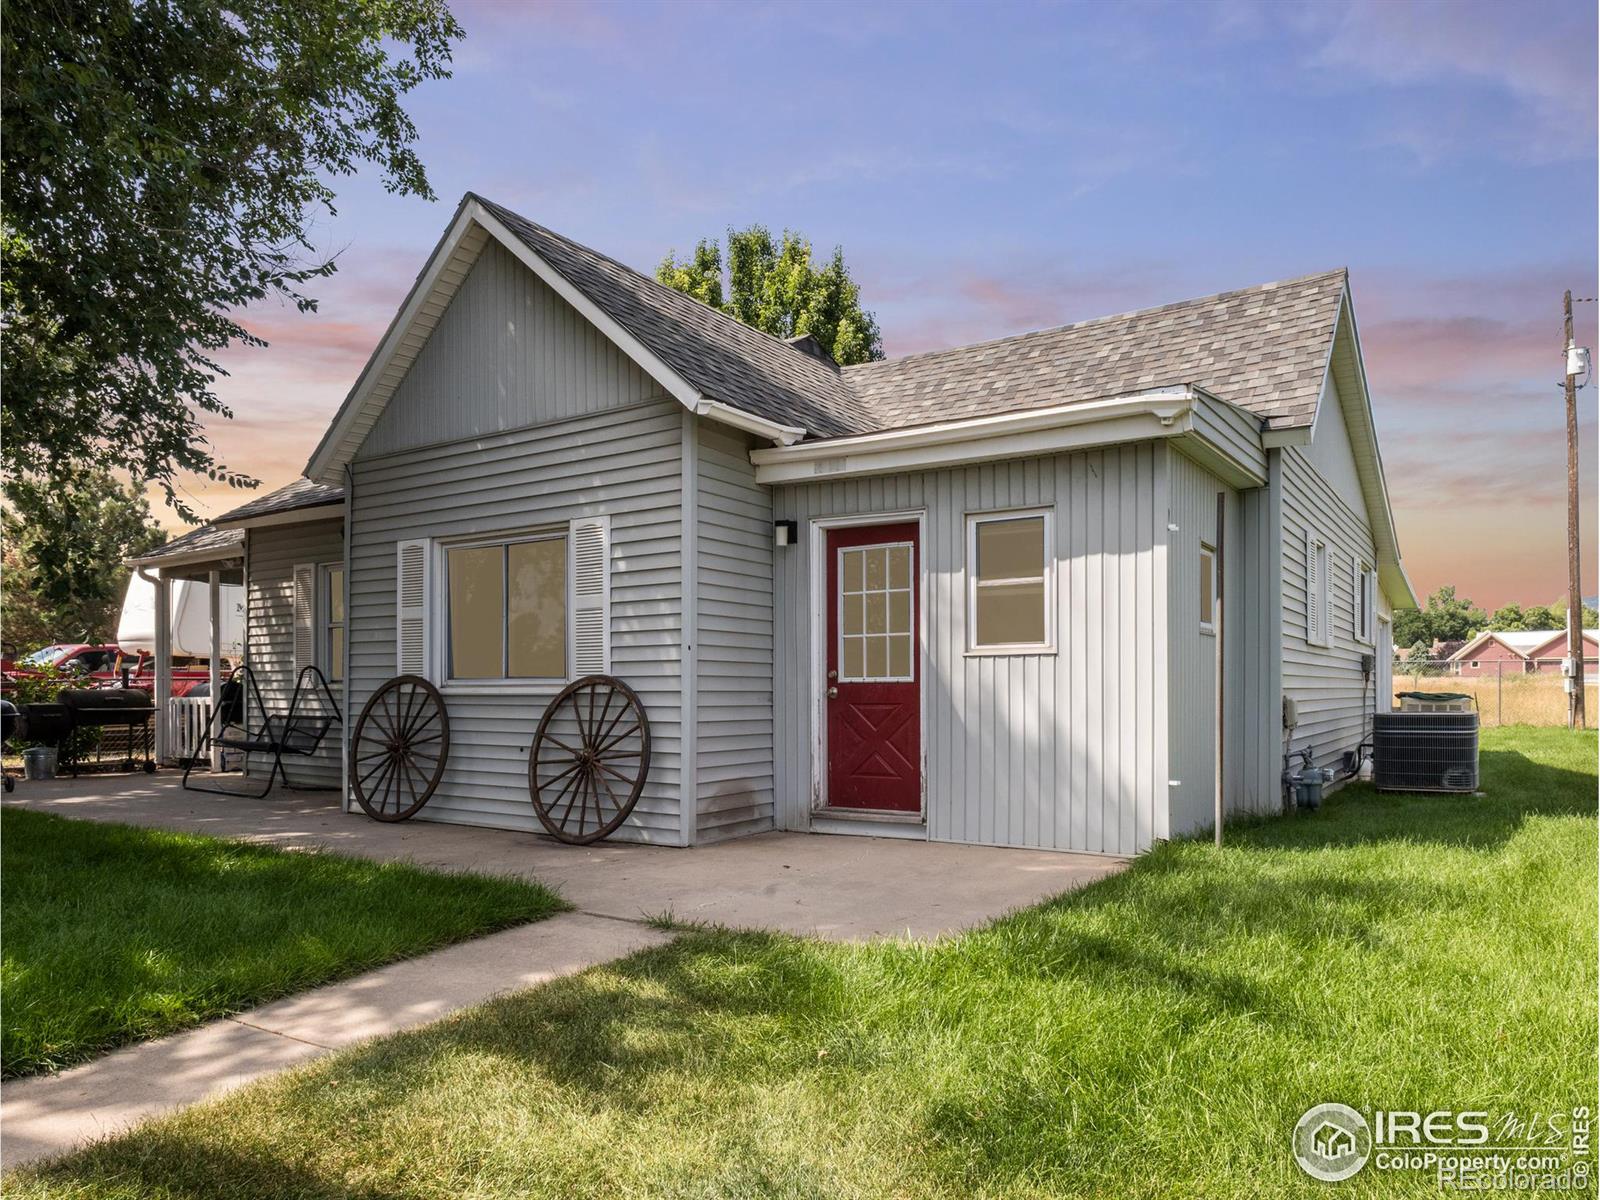 2127 W County Road 38 E , fort collins MLS: 456789994345 Beds: 2 Baths: 1 Price: $639,000